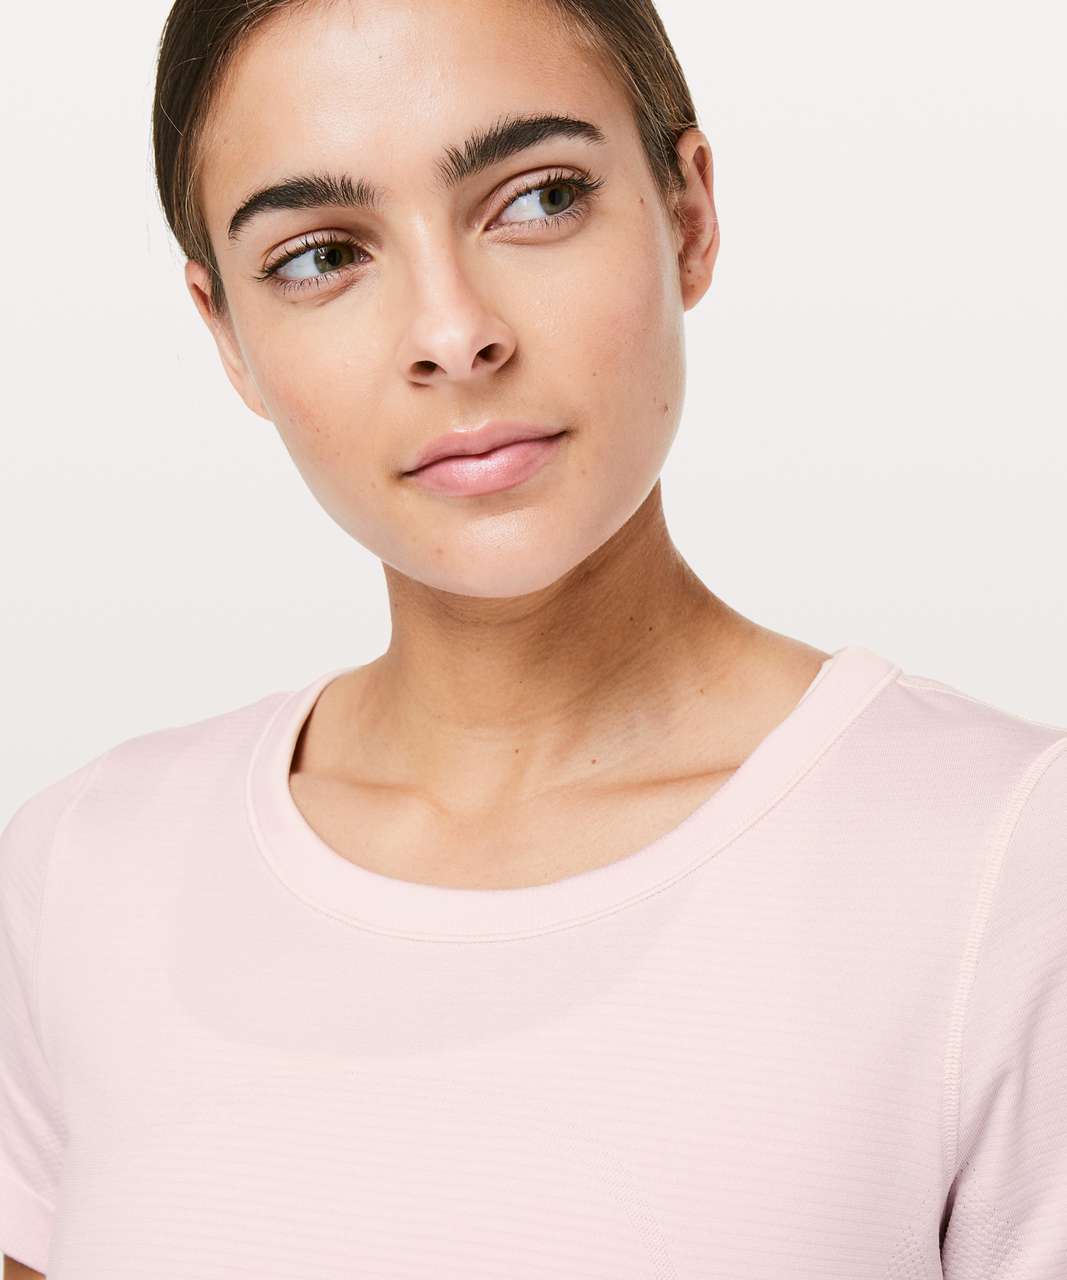 Lululemon Swiftly Tech Short Sleeve (Breeze) *Relaxed Fit - Blissful Pink / Blissful Pink